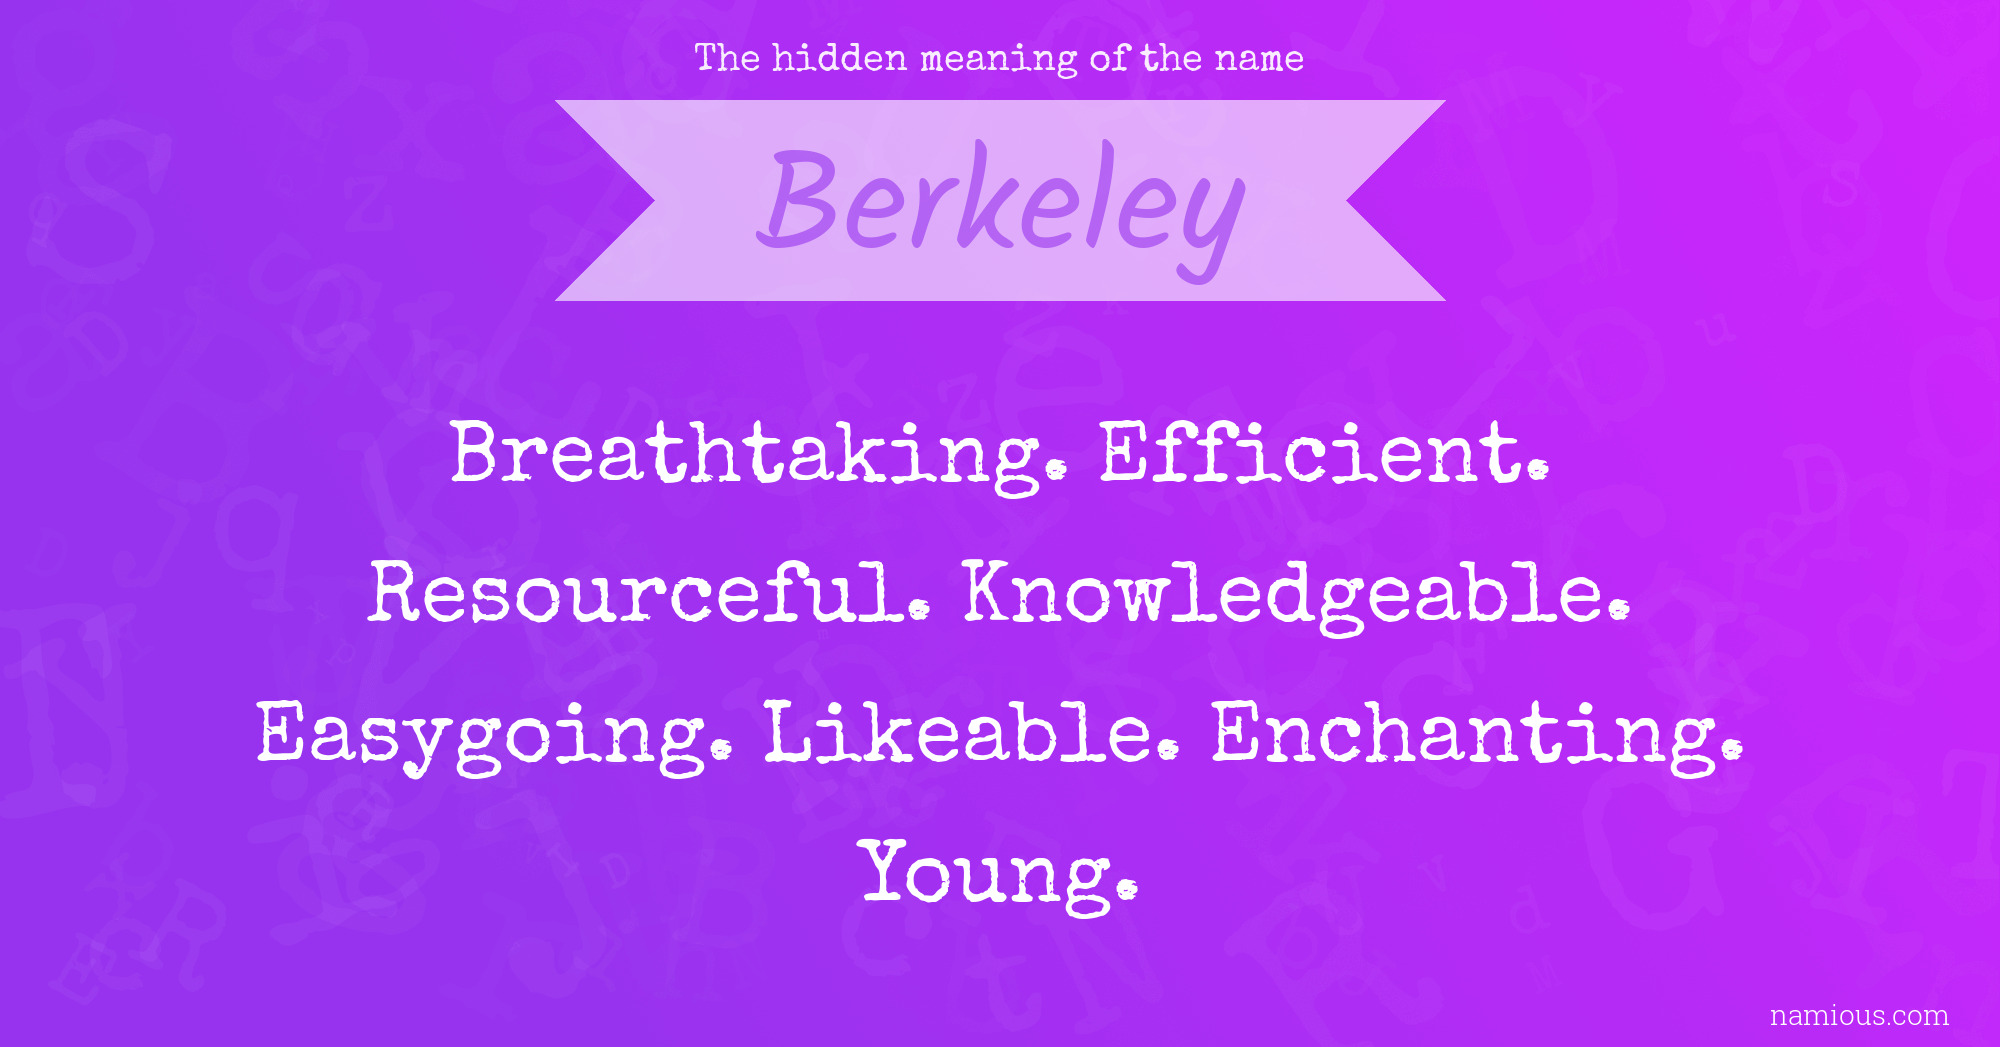 The hidden meaning of the name Berkeley